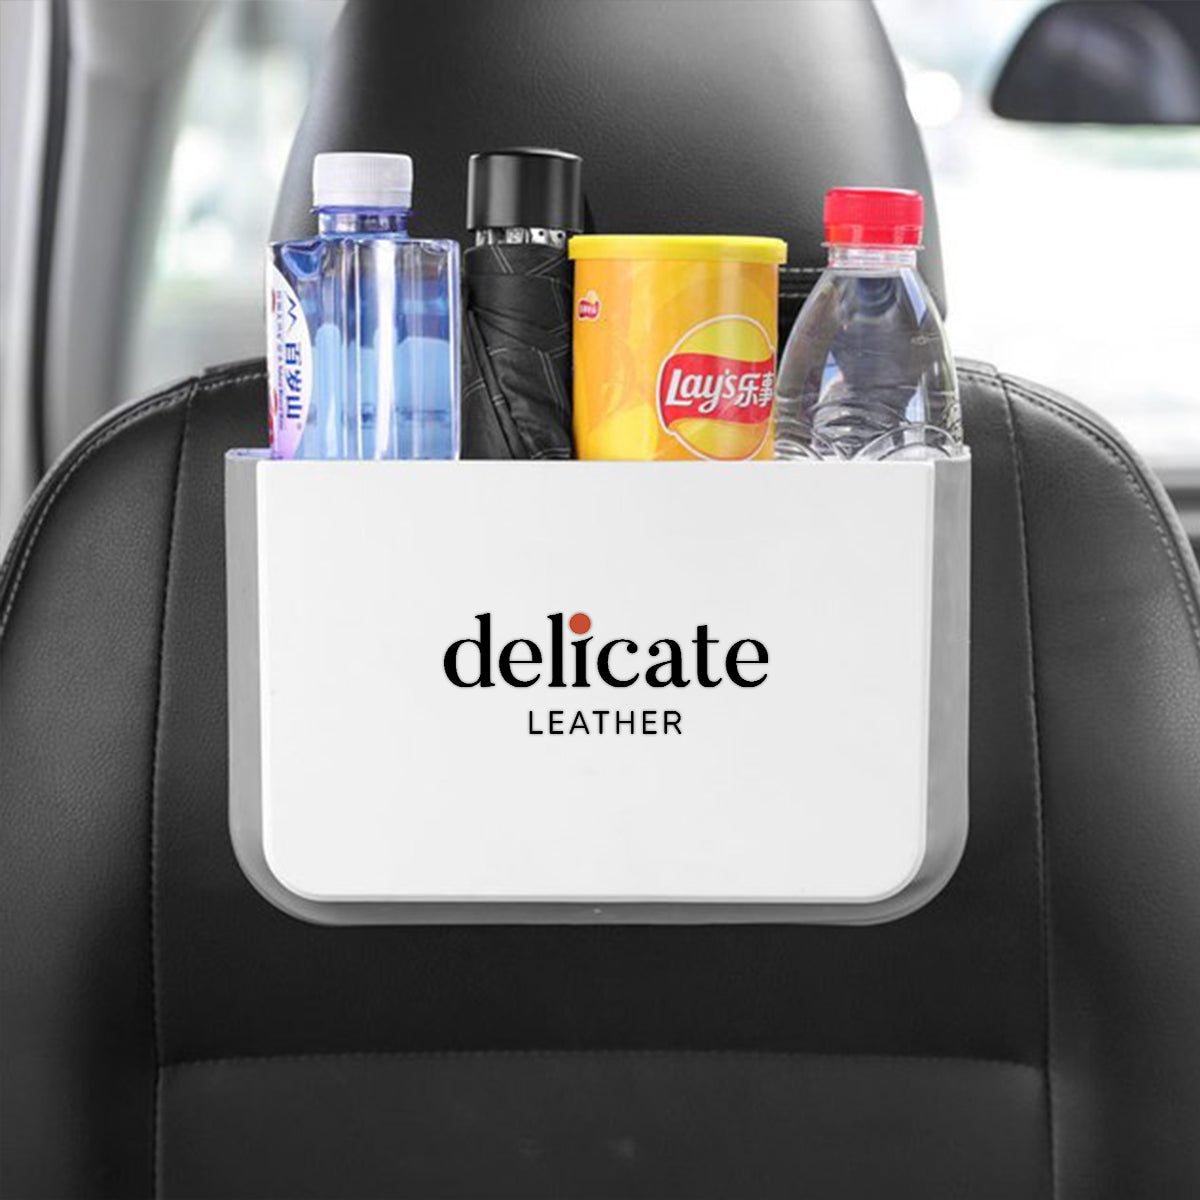 Delicate Leather Hanging Waterproof Car Trash can-Foldable, Custom For Your Cars, Waterproof, and Equipped with Cup Holders and Trays. Multi-Purpose, Car Accessories PE11992